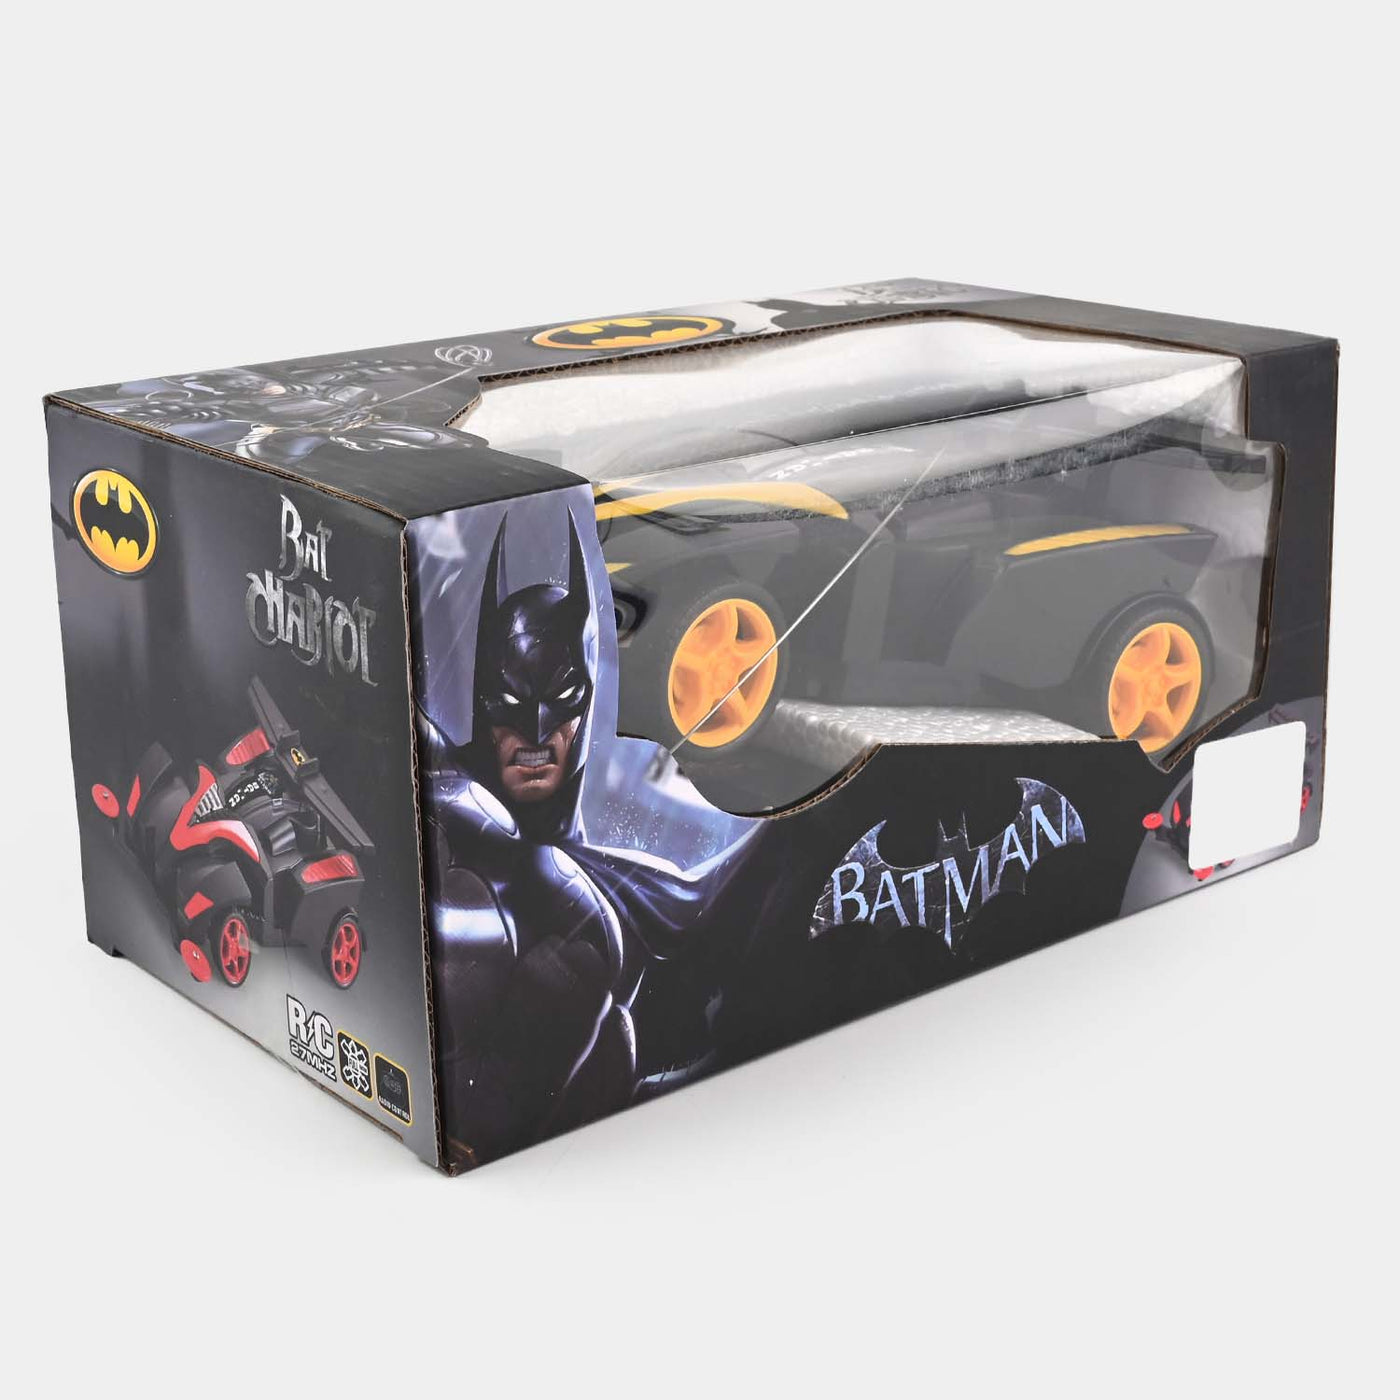 Remote Control Sports Car For Kids